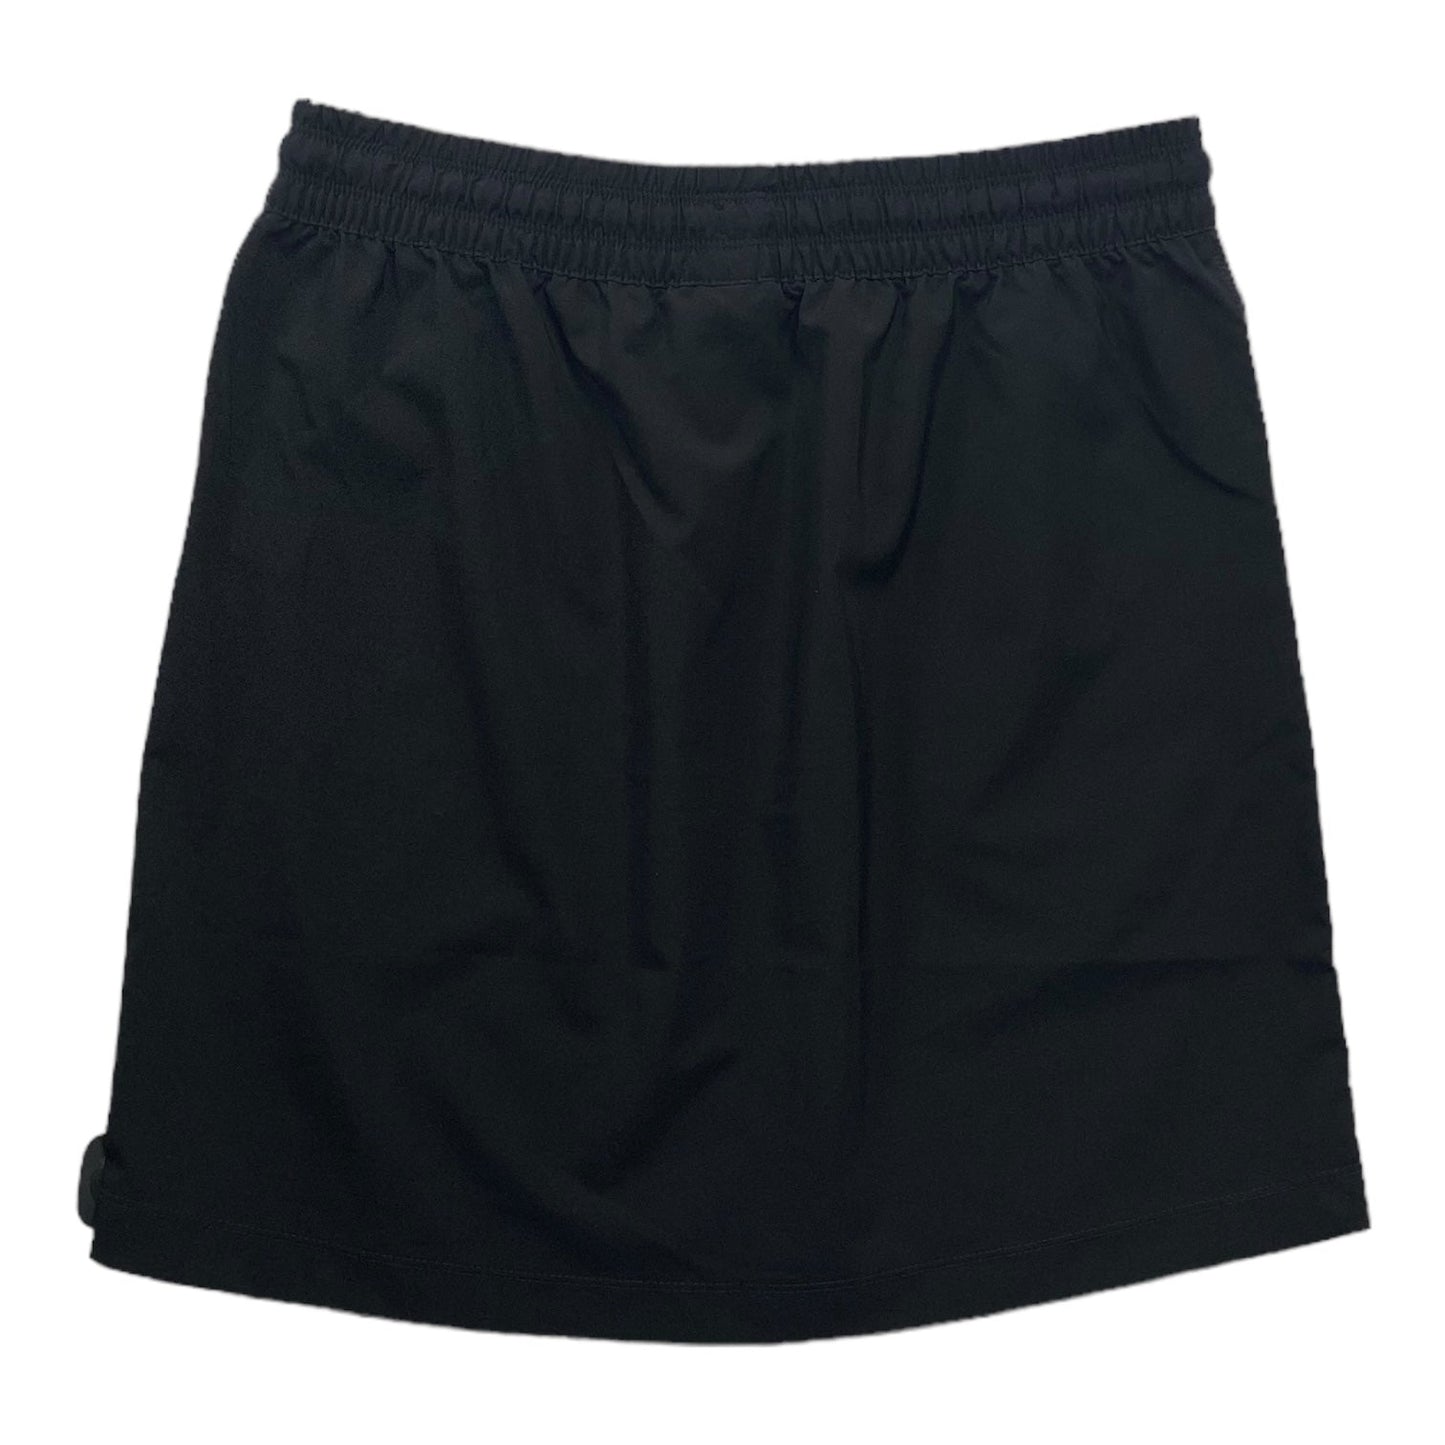 Black Athletic Skirt The North Face, Size S